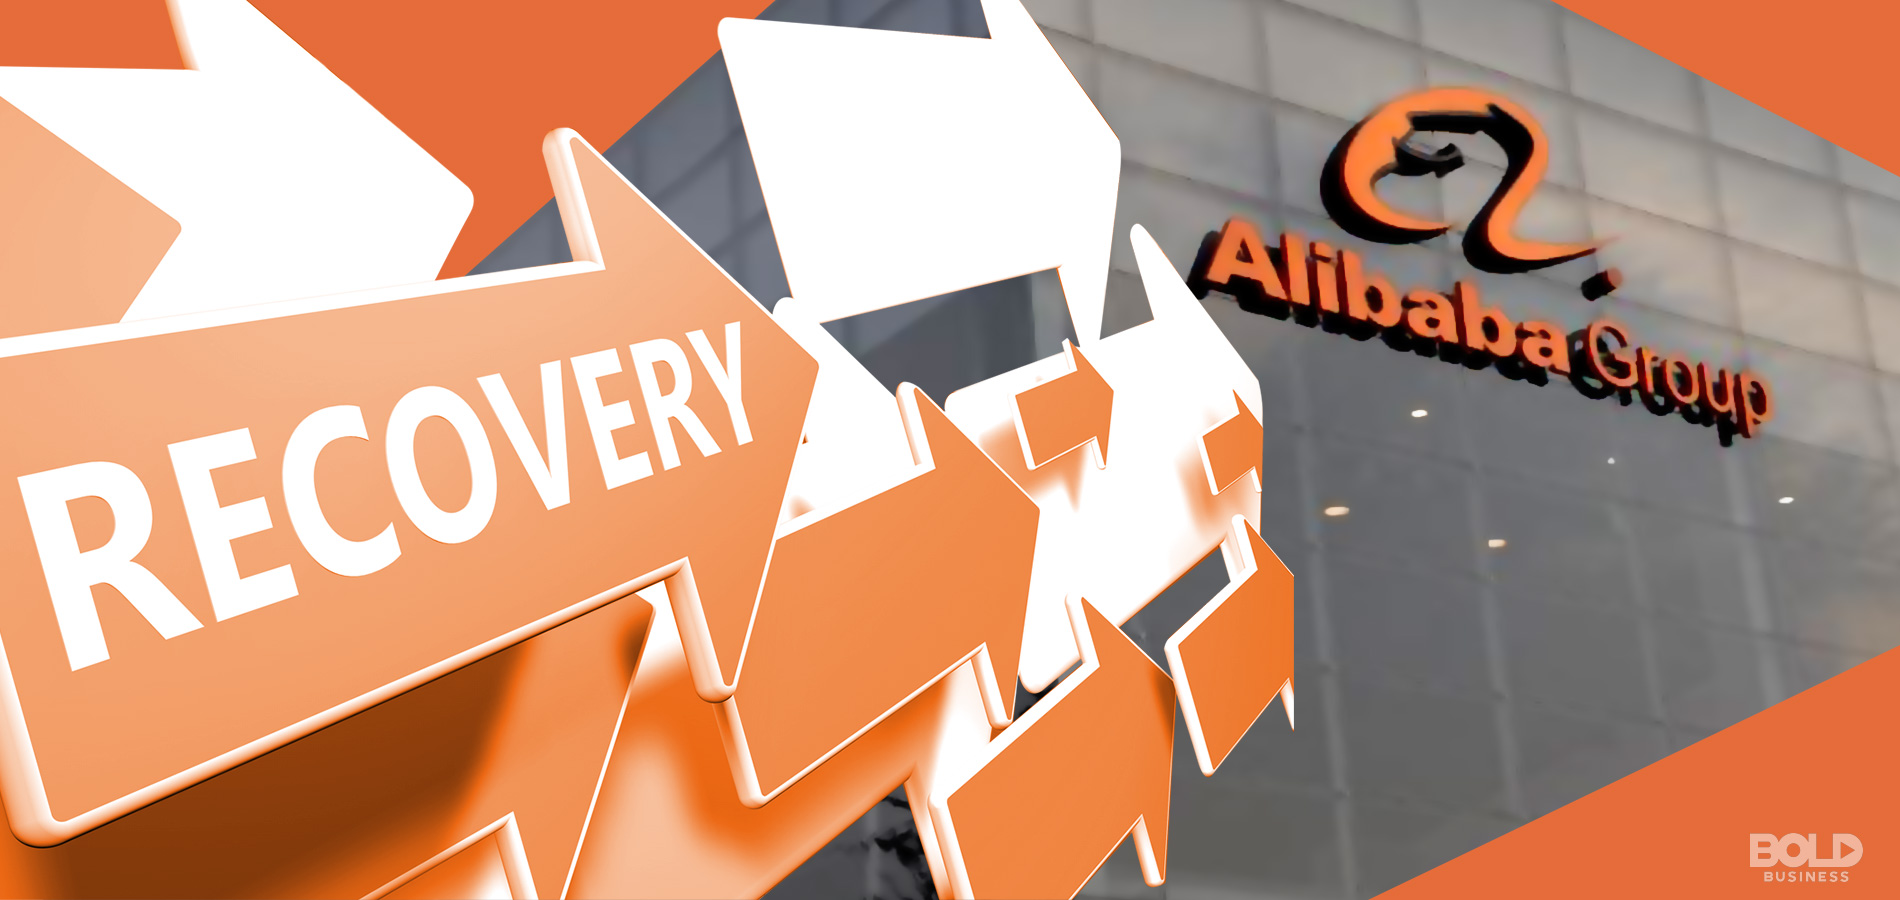 Alibaba's Stock Price is Recovering